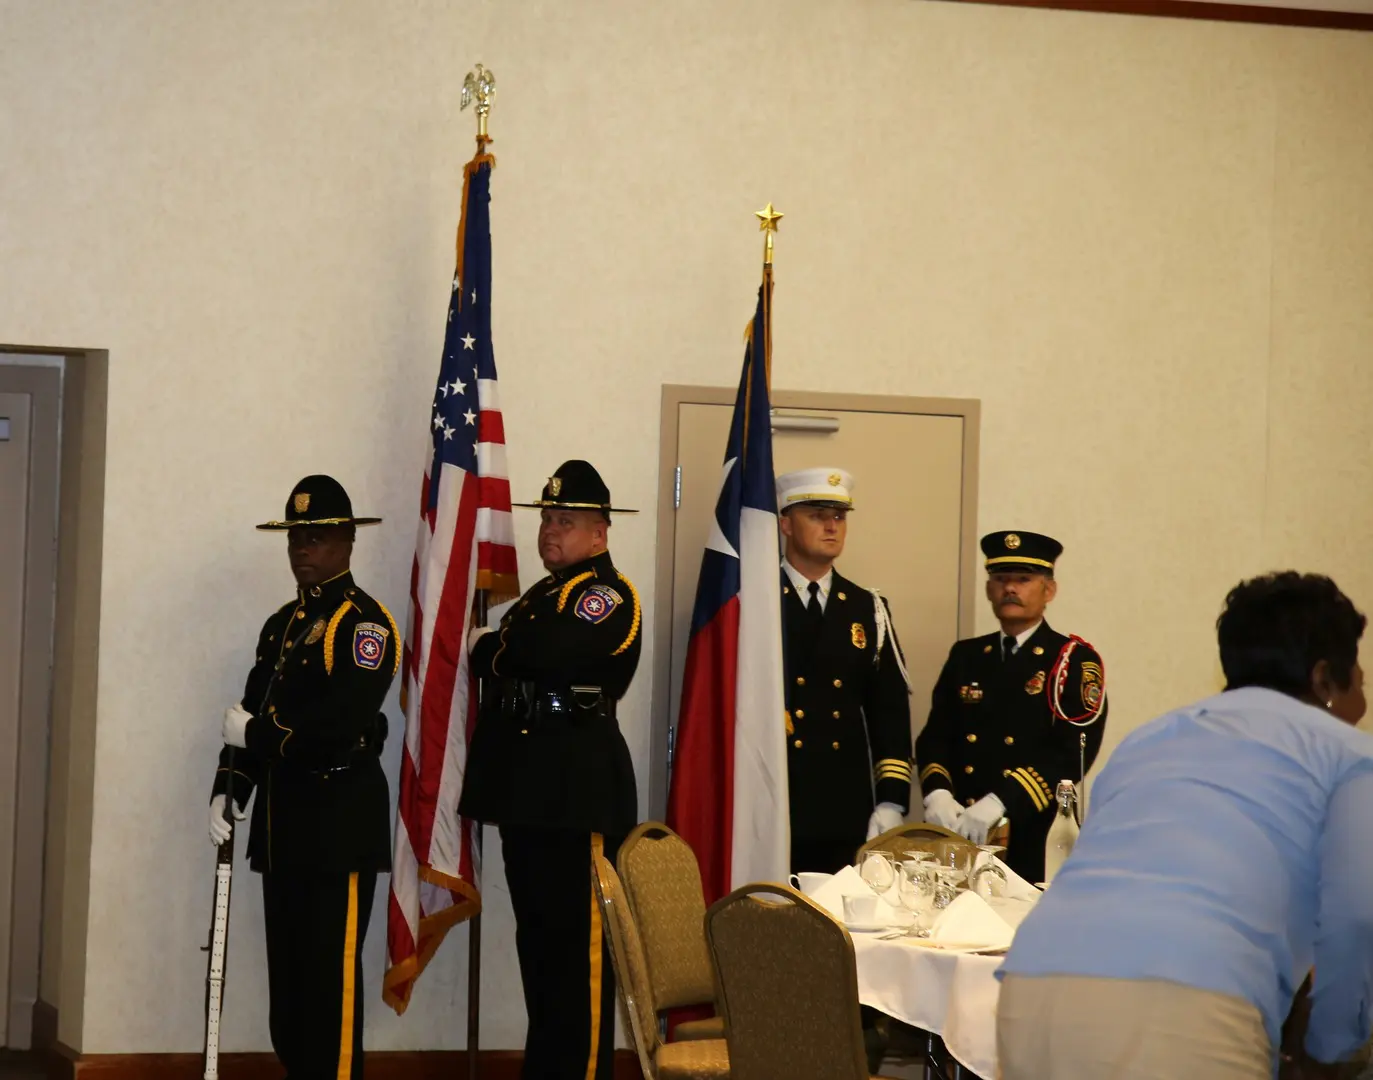 A group of police officers standing in a room.